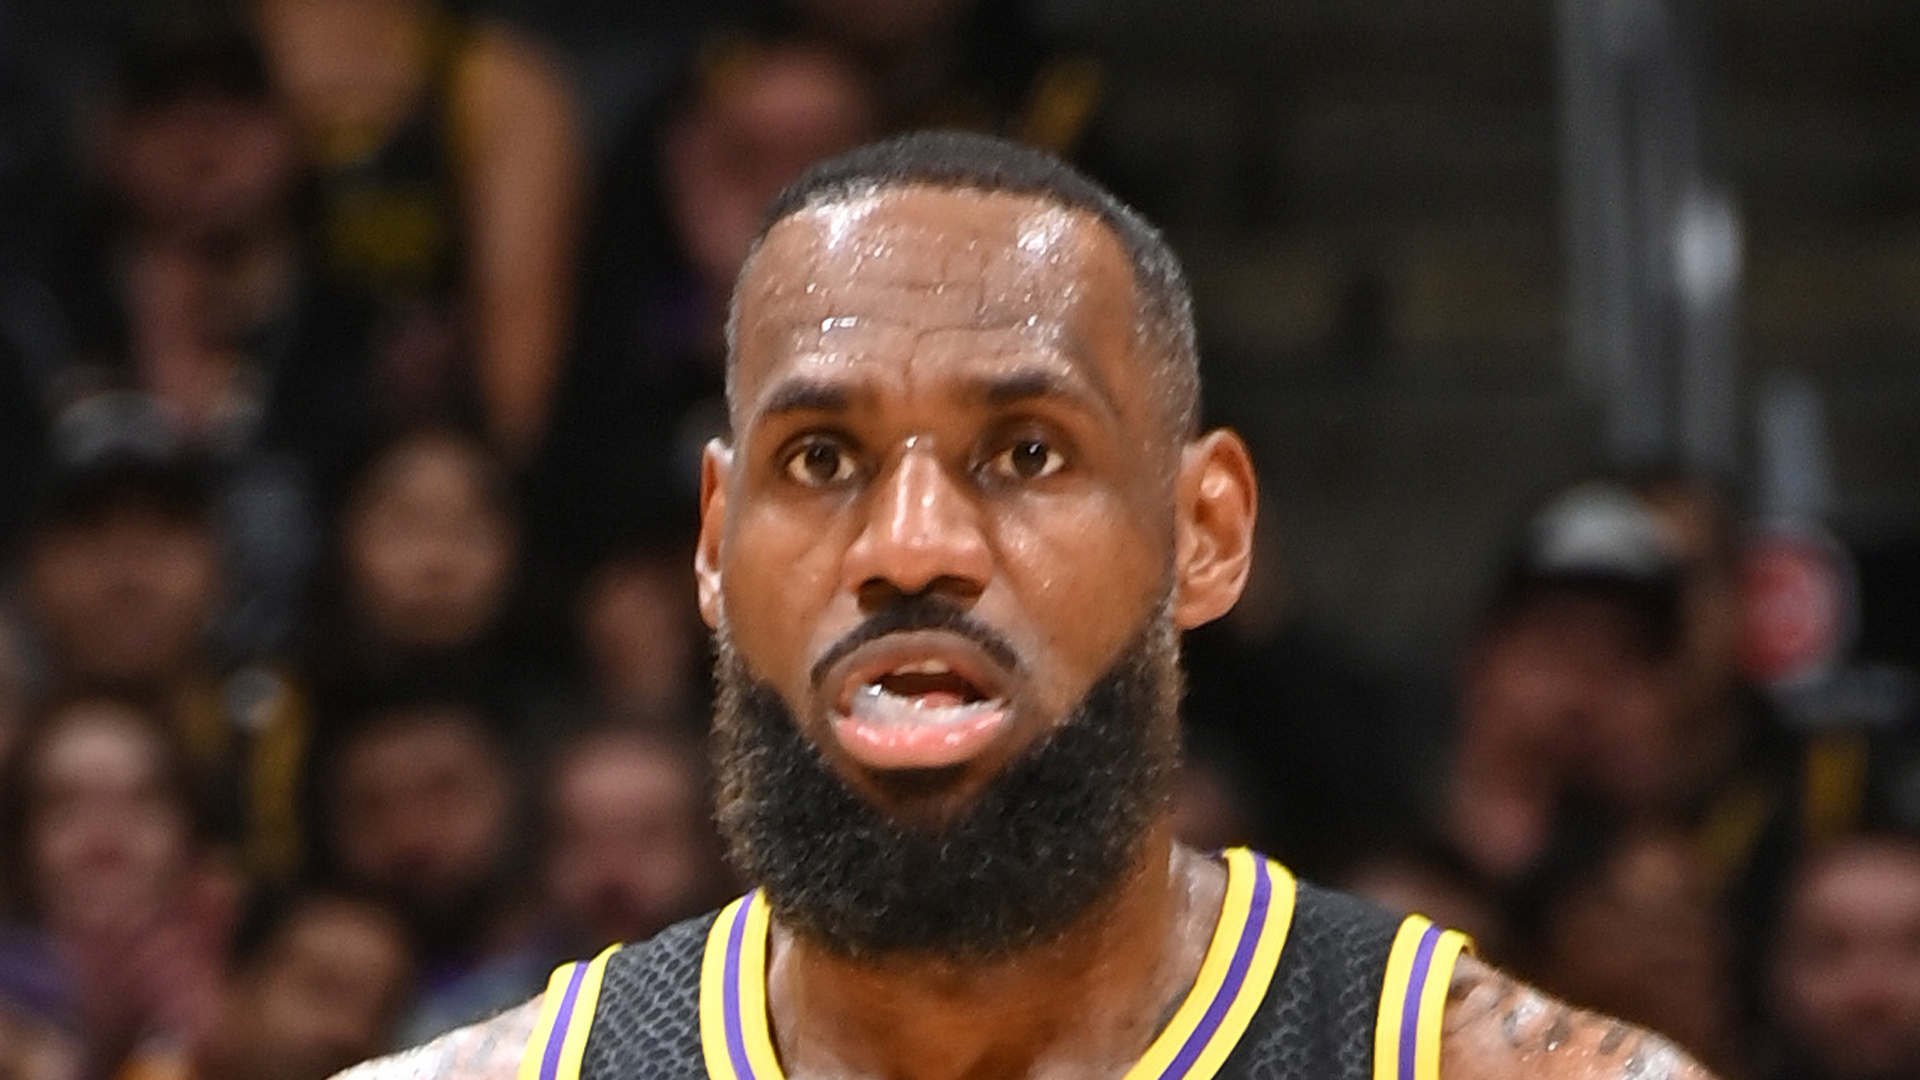 Lakers’ LeBron James roasted over deleting viral post as NBA fans say ‘dude needs a PR guy’ after social media rant [Video]